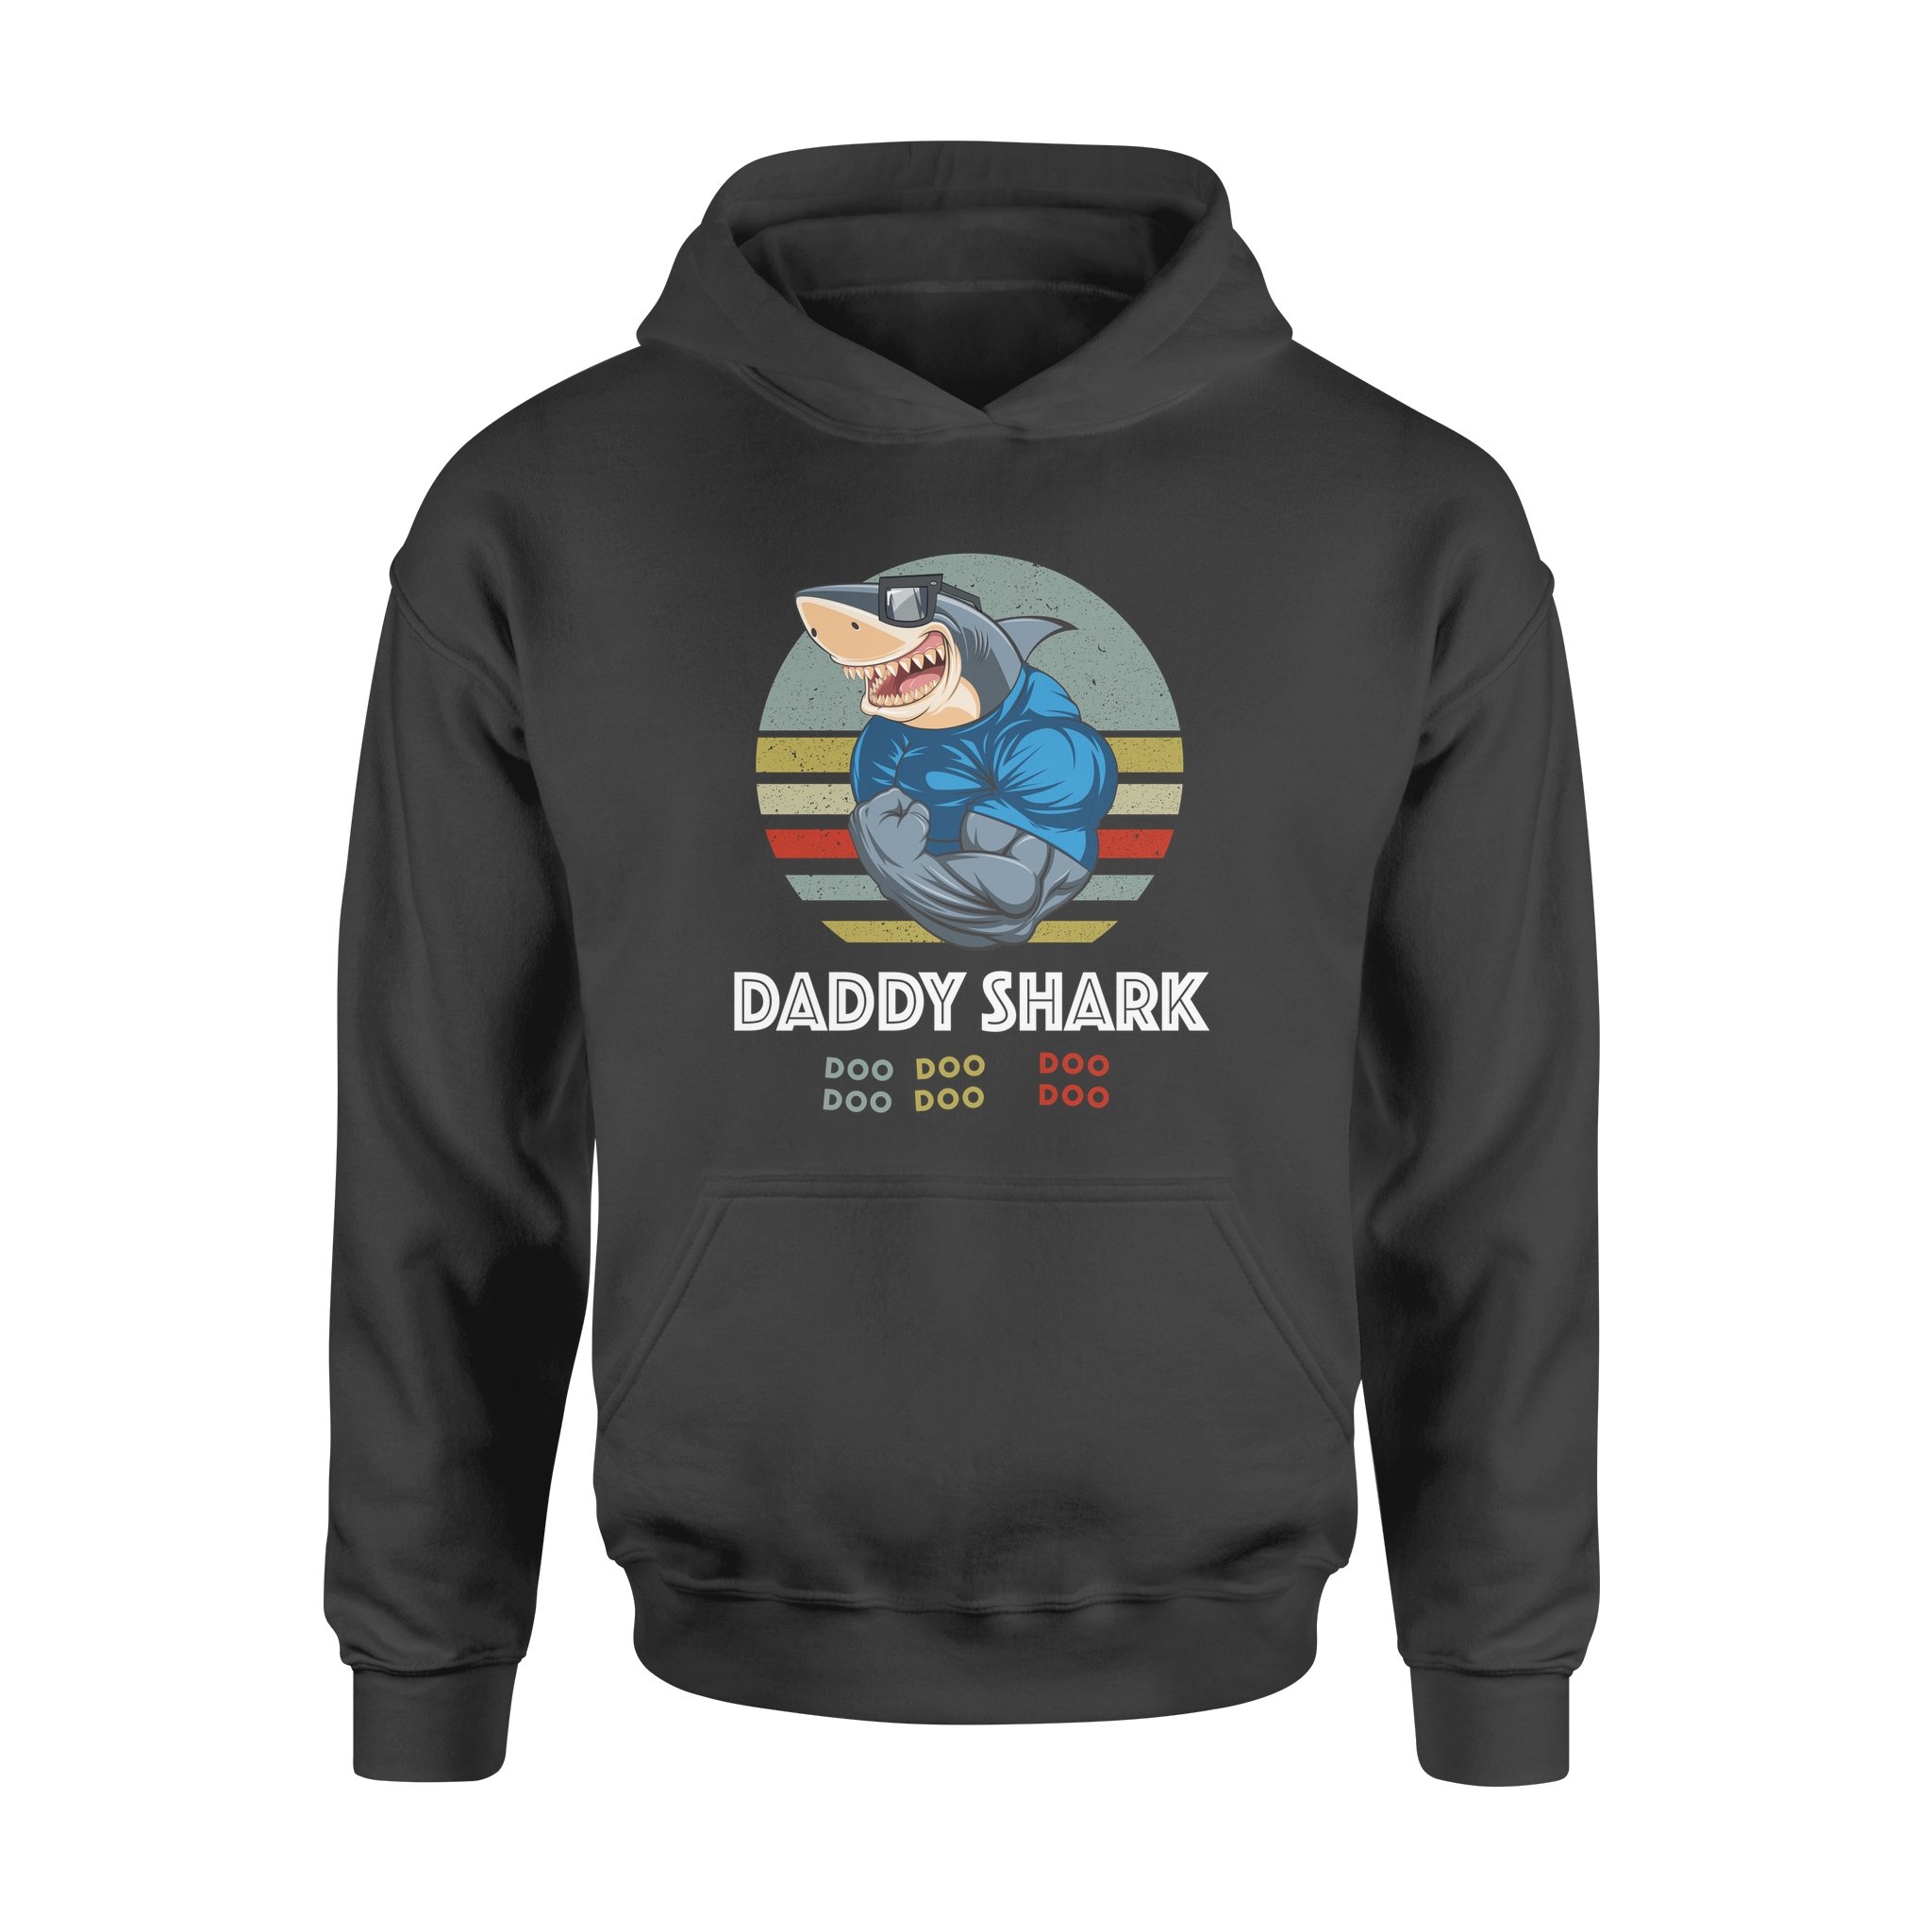 DADDY SHARK,DAD SHIRT,GIFTS FOR DAD,DAD GIFTS,FATHER?S DAY GIFT,GIFT FOR MEN SHIRT,PLUS SIZE SHIRT